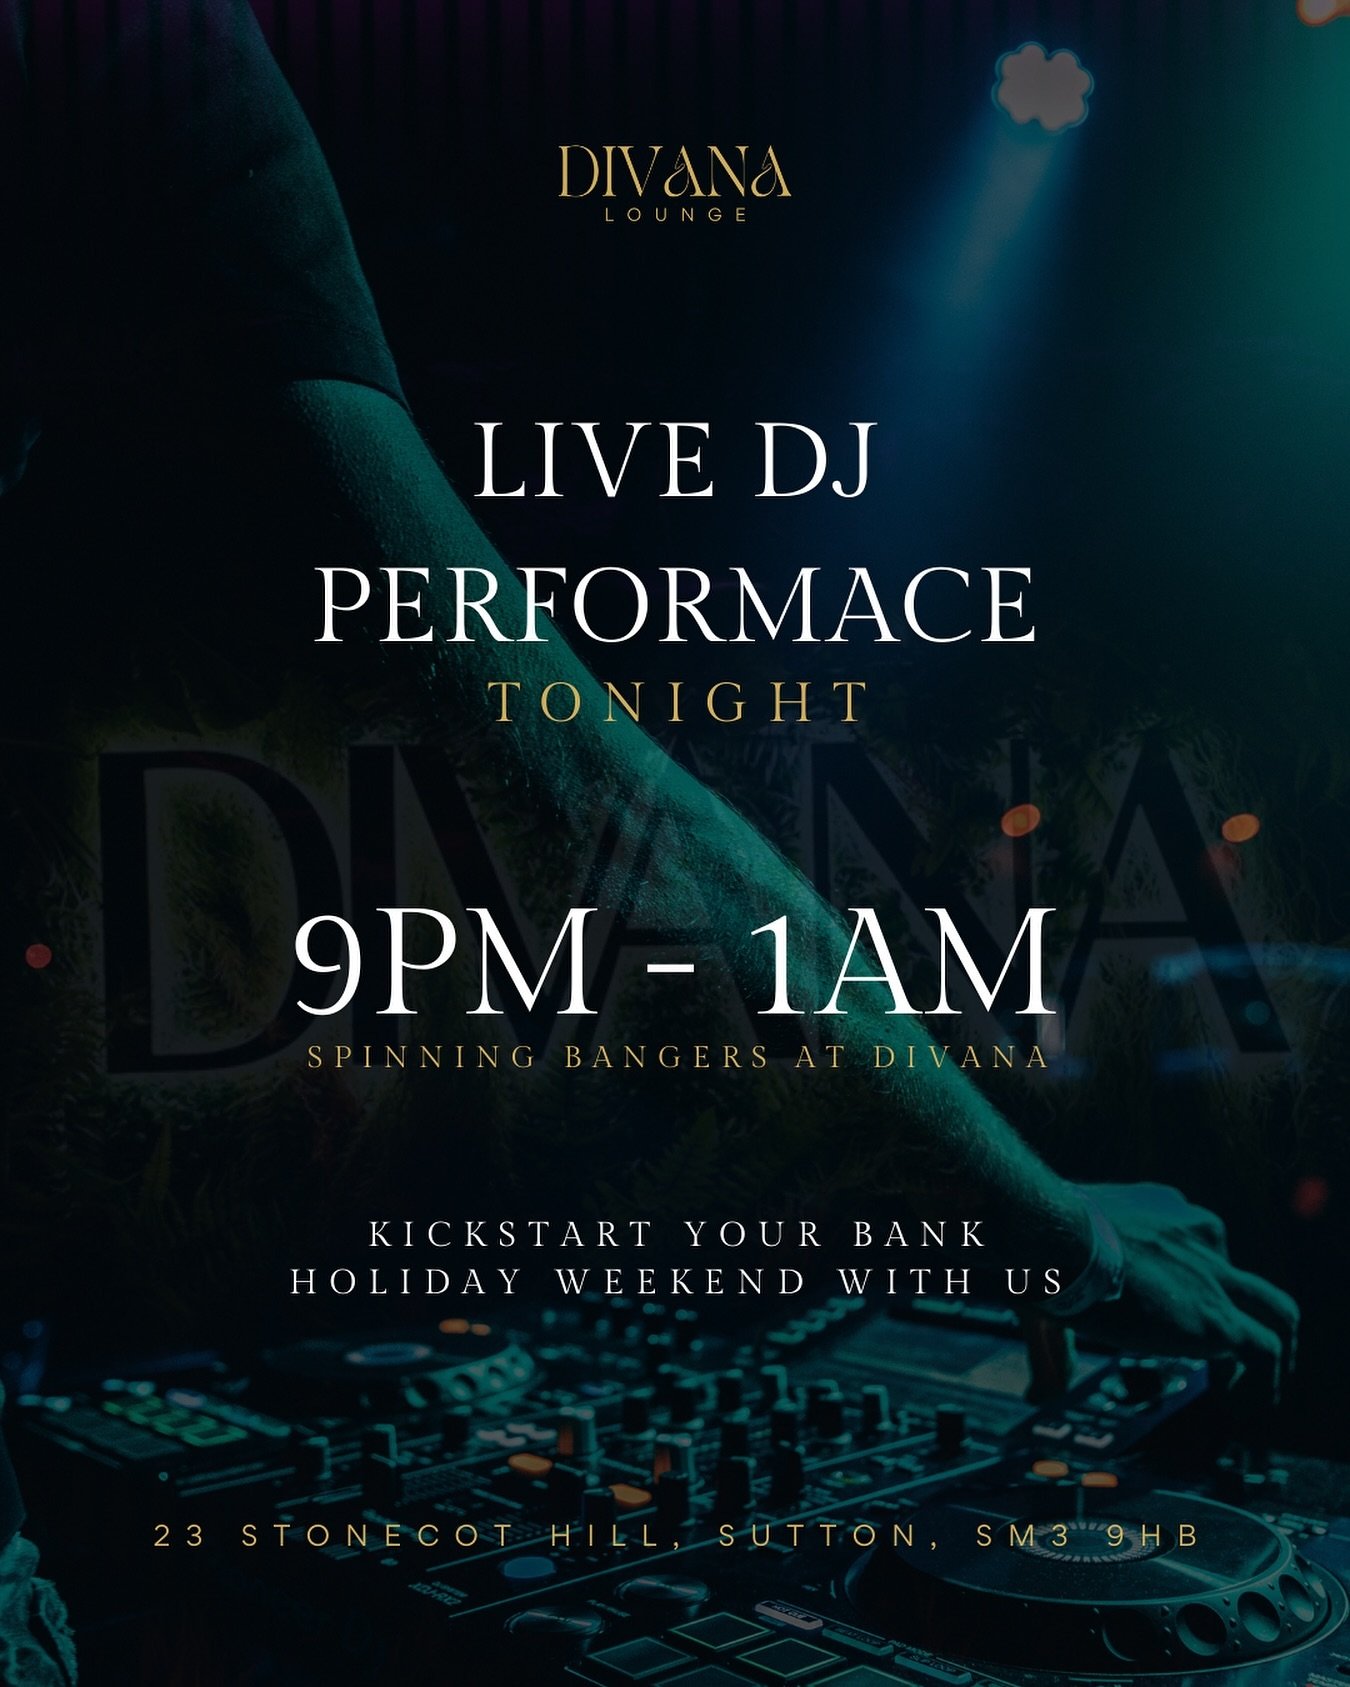 It&rsquo;s time to turn up the volume and get your party on! 💃

TONIGHT, we have a LIVE DJ (octobrthirty) from 9PM to 1AM to kickstart the bank holiday weekend, don&rsquo;t miss out and join us tonight! 🎶👀

P.S you can enjoy 20% off on your final 